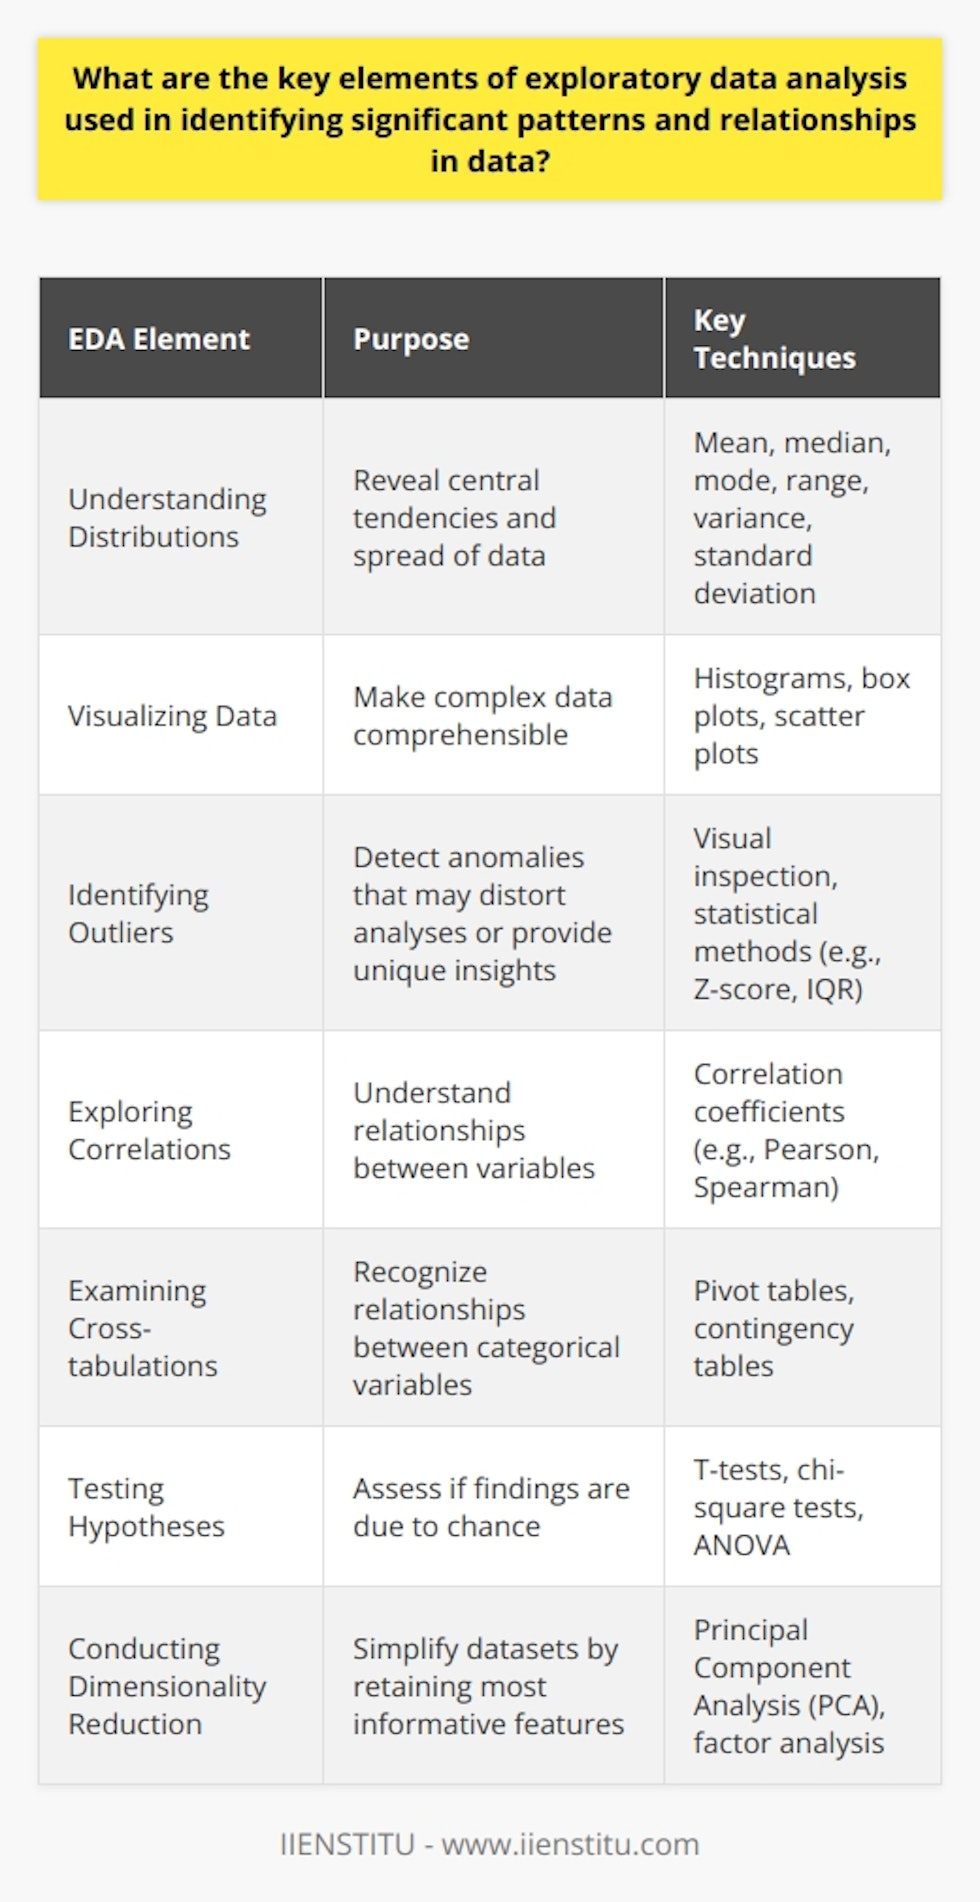 Exploratory Data Analysis: Uncovering Patterns and Relationships Exploratory Data Analysis, or EDA, serves as a critical process. Data scientists initiate it to understand datasets. It is fundamental before advanced analysis. Through EDA, significant patterns and relationships emerge. These insights guide further analytical efforts. We explore EDAs key elements below. Understanding Distributions The  distribution  of a variable reveals much. It indicates the variables central tendencies. These include the  mean ,  median , and  mode . The distribution also shows  range ,  variance , and  standard deviation . Such metrics illuminate datas spread and central location. Visualizing Data Graphical representations  are EDA cornerstones. They make complex data comprehensible. Charts and plots are standard tools. Applications include  histograms ,  box plots , and  scatter plots . Each visualization approach suits different data types. They help us to identify outliers and patterns. Identifying Outliers Outliers are data points that stand out. They do not fit the pattern of the majority. EDA seeks these anomalies actively. Outliers can distort statistical analyses. They may indicate errors or unique insights. It is crucial to understand their origin. Exploring Correlations Understanding relationships is key.  Correlation  reflects the strength of a relationship. Positive correlation suggests a direct relationship. Negative correlation signifies an inverse relationship. No correlation implies no apparent relationship. Correlation coefficients quantify these relationships. Examining Cross-tabulations Cross-tabulations, or pivot tables, compare data across categories. They help in recognizing relationships between categorical variables. These tables are simple yet powerful. Through them, we observe how variables behave jointly. Testing Hypotheses Hypothesis testing assesses if findings are due to chance. It involves setting up  null  and  alternative hypotheses . Statistical tests evaluate these hypotheses. The tests include t-tests, chi-square tests, and ANOVA. They determine if observations likely reflect true relationship patterns. Conducting Dimensionality Reduction Datasets often have many variables. Not all contribute to patterns. Dimensionality reduction simplifies datasets. Techniques like  Principal Component Analysis  (PCA) are common. They retain the most informative features. Thus, they clarify underlying structure in the data. Iterative Analysis EDA is not a linear process. It is iterative and dynamic. Analysts refine questions as understanding deepens. Repeated analysis cycles are standard. They refine focus on variables with most potential. Through these elements, EDA equips us to spot trends, relationships, and discrepancies. It is a critical process that precedes more complex models and predictions. EDA lays the groundwork for effective data-driven decision-making.